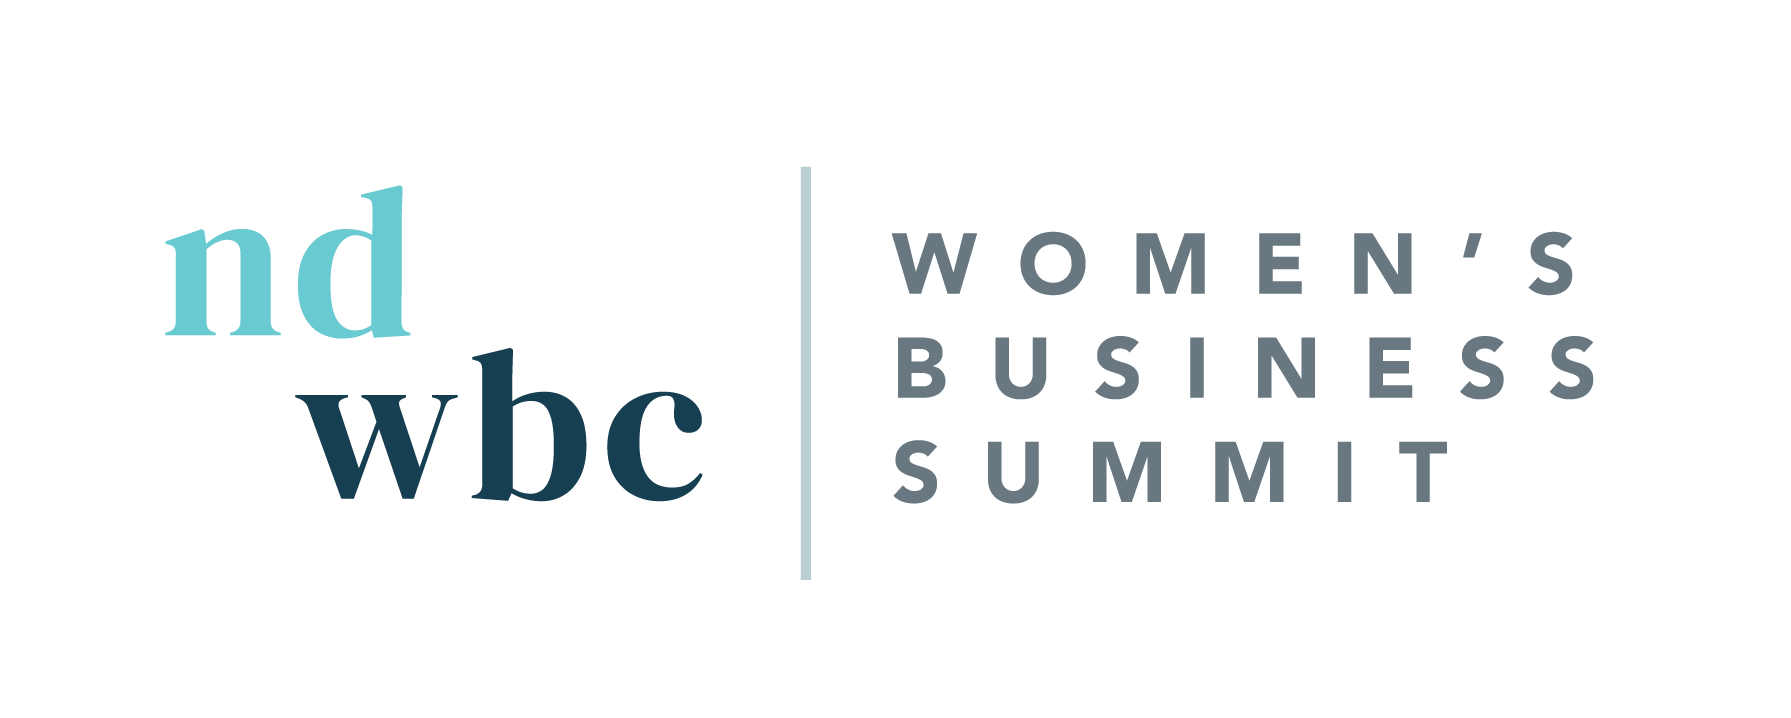 NDWBC_Acronym 1_Womens Business Summit_Color.png